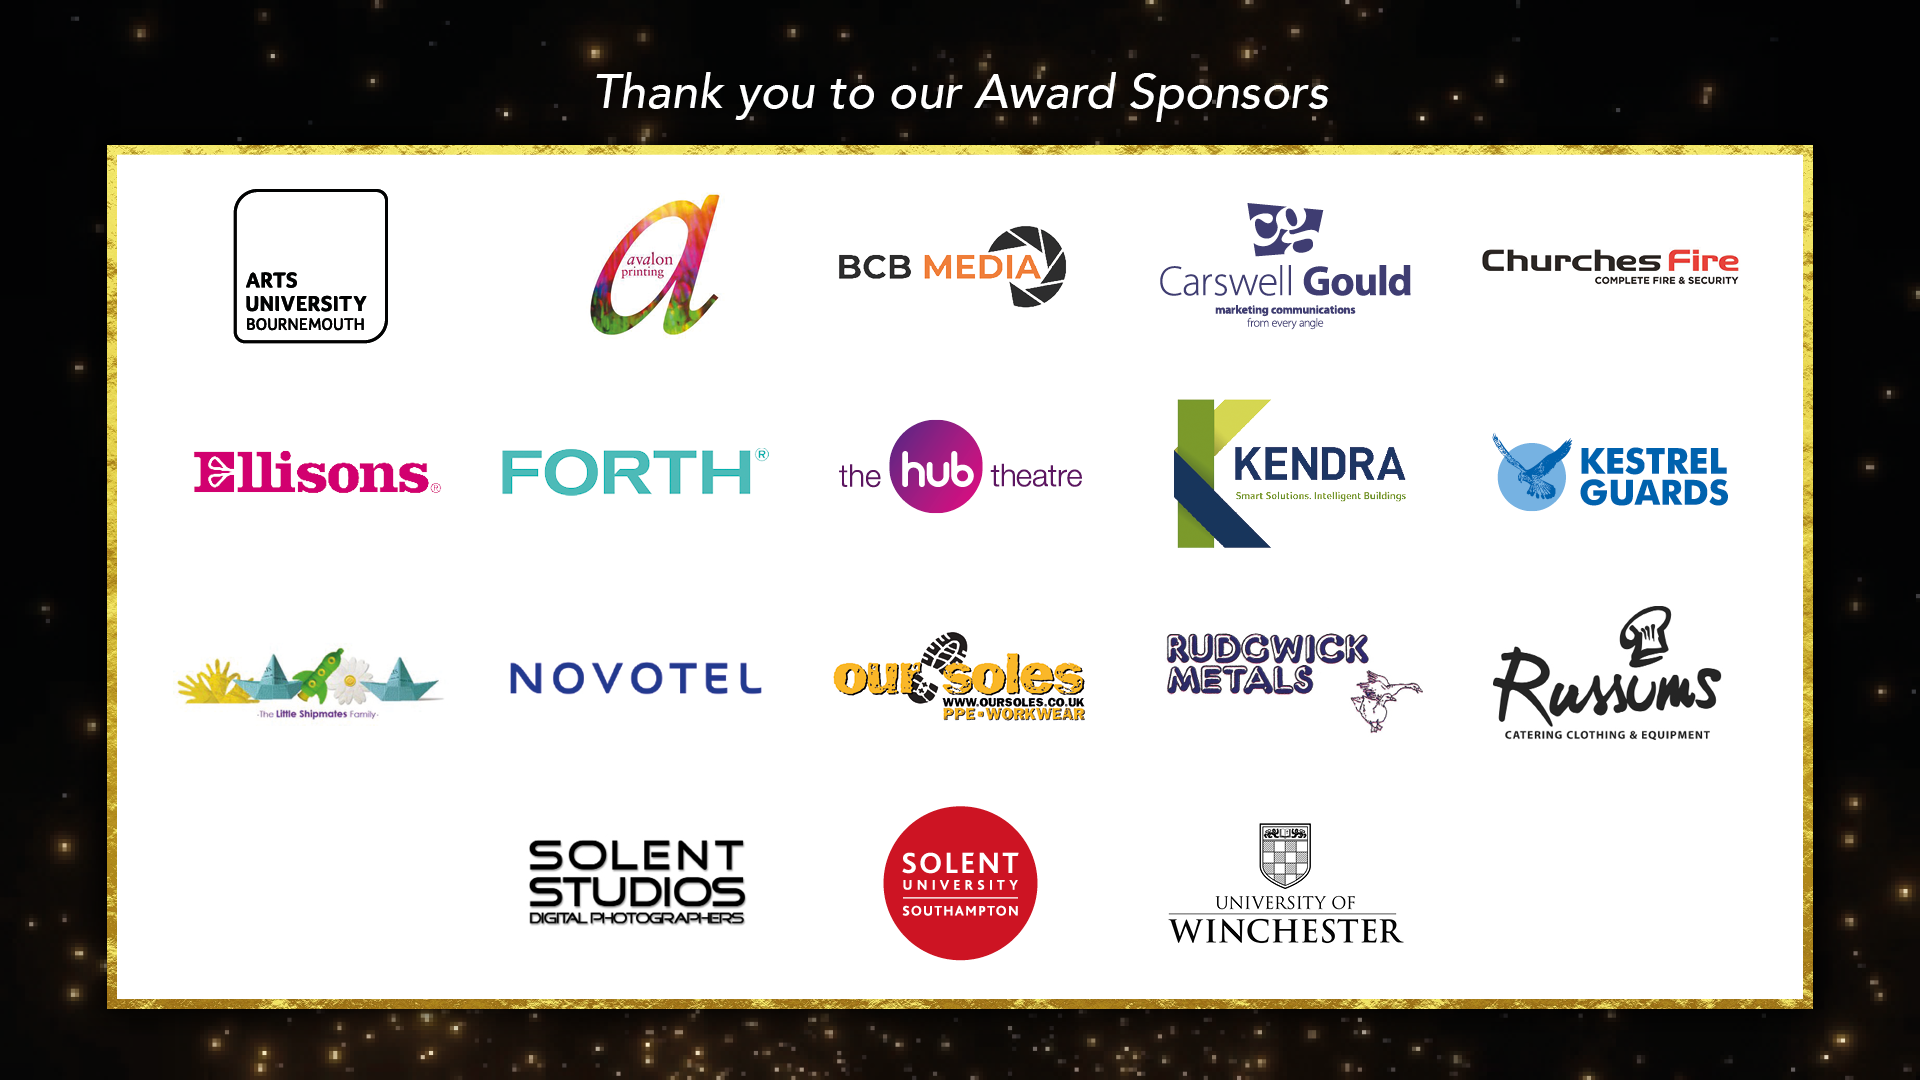 Collage of logos of the awards sponsors